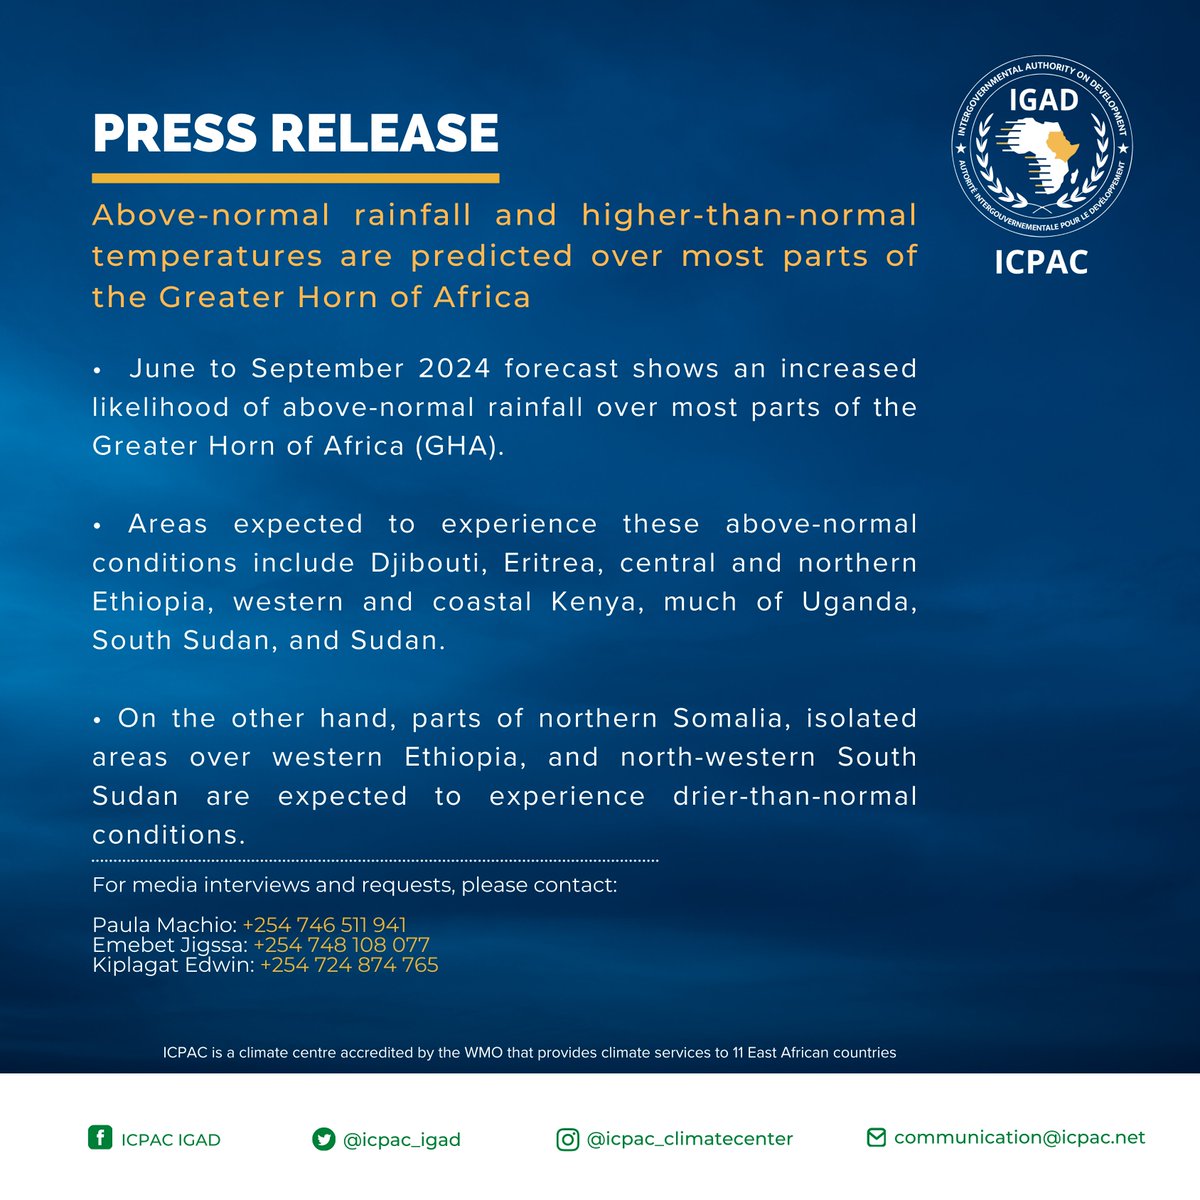 ℹ️  OFFICIAL #GHACOF67 RELEASE!

⛈️☀️ Above-normal rainfall and higher-than-normal temperatures are predicted over most parts of the Greater #HornofAfrica for the June to September 2024 season.

Read the full statement below.

📰 English ➡️ bit.ly/3RhX1Uj
📰 French  ➡️